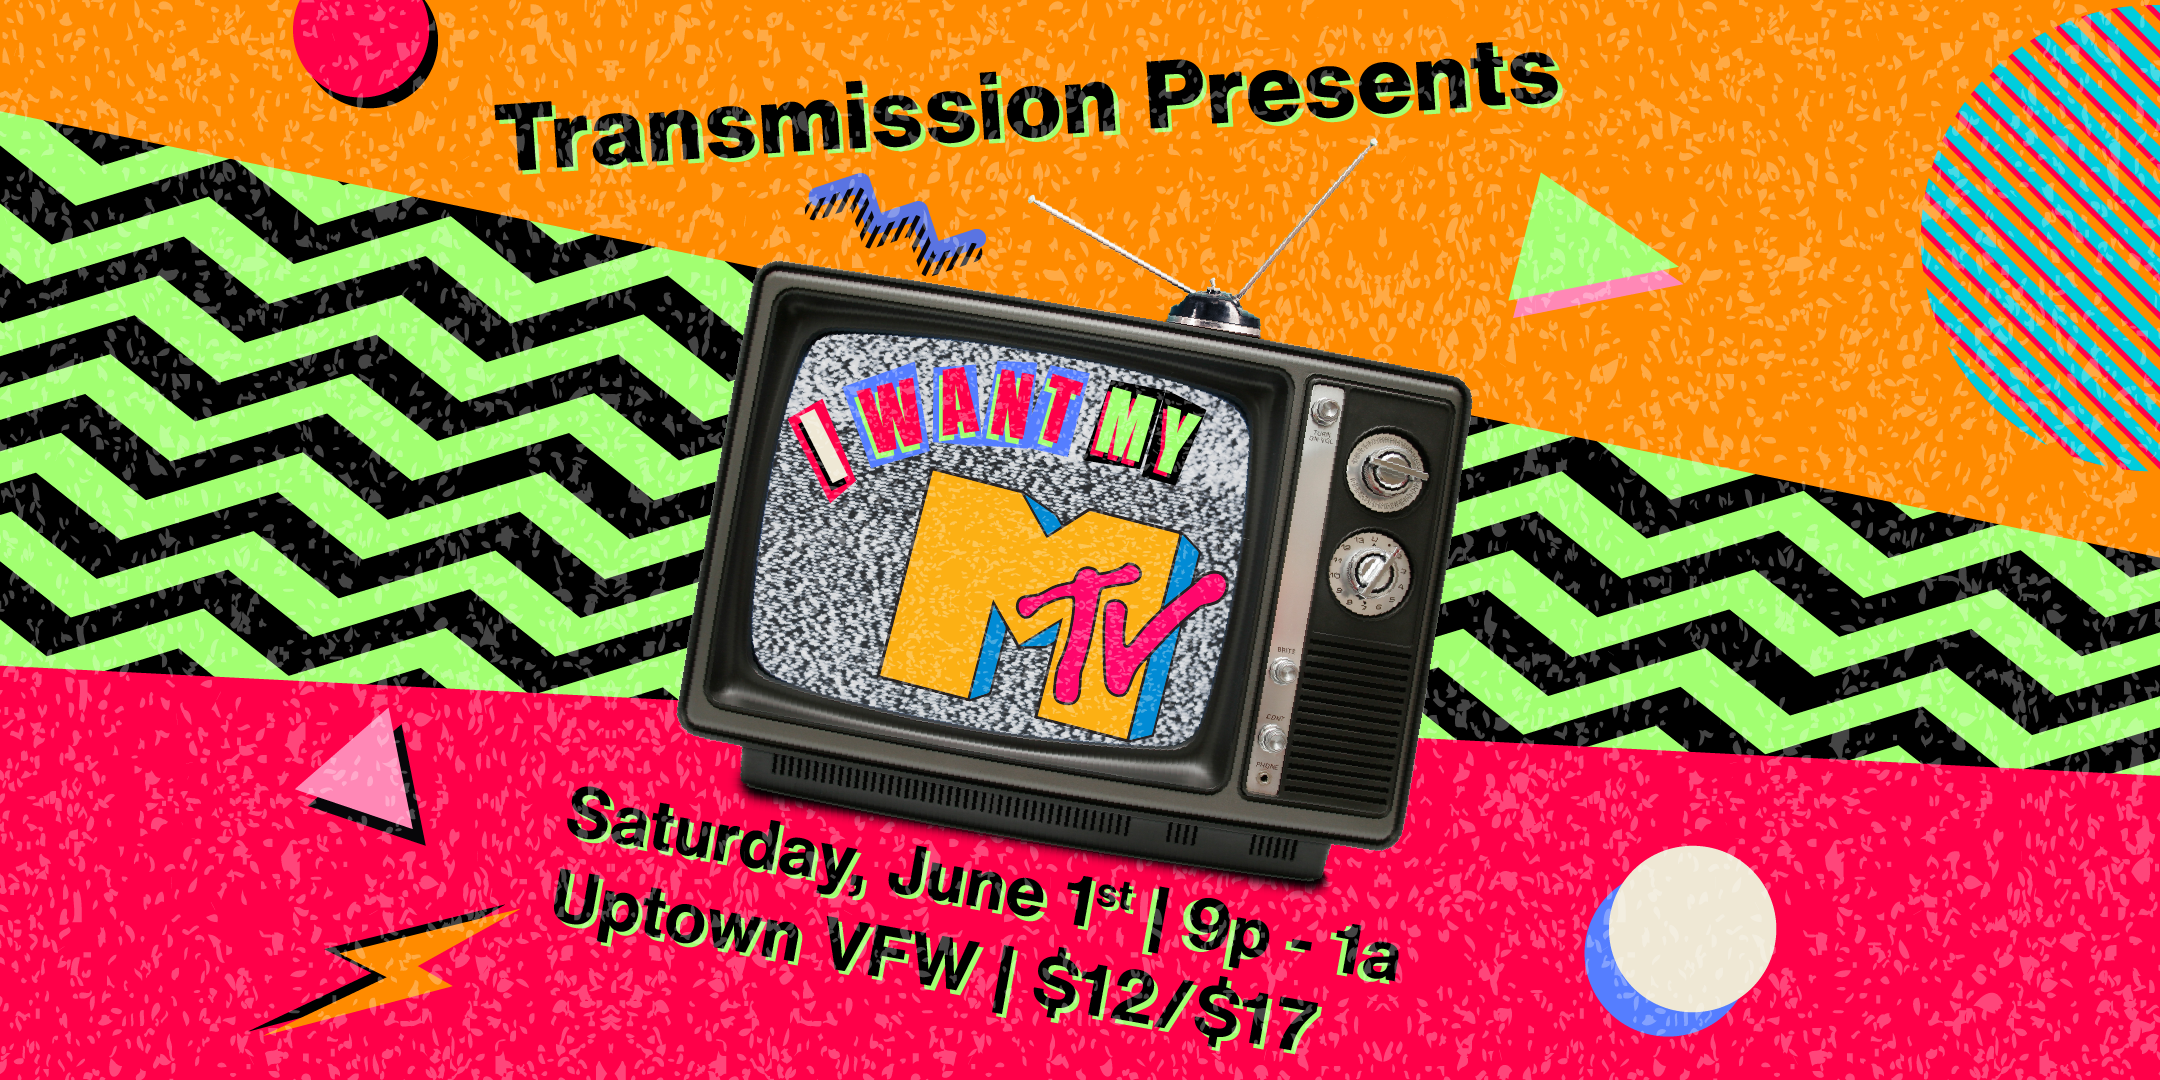 Transmission Presents "I Want My MTV" Saturday, June 1 James Ballentine "Uptown" VFW Post 246 Doors 9:00pm :: Music 9:00pm :: 21+ GA $12 ADV / $17 DOS NO REFUNDS Ticket On-Sale Now